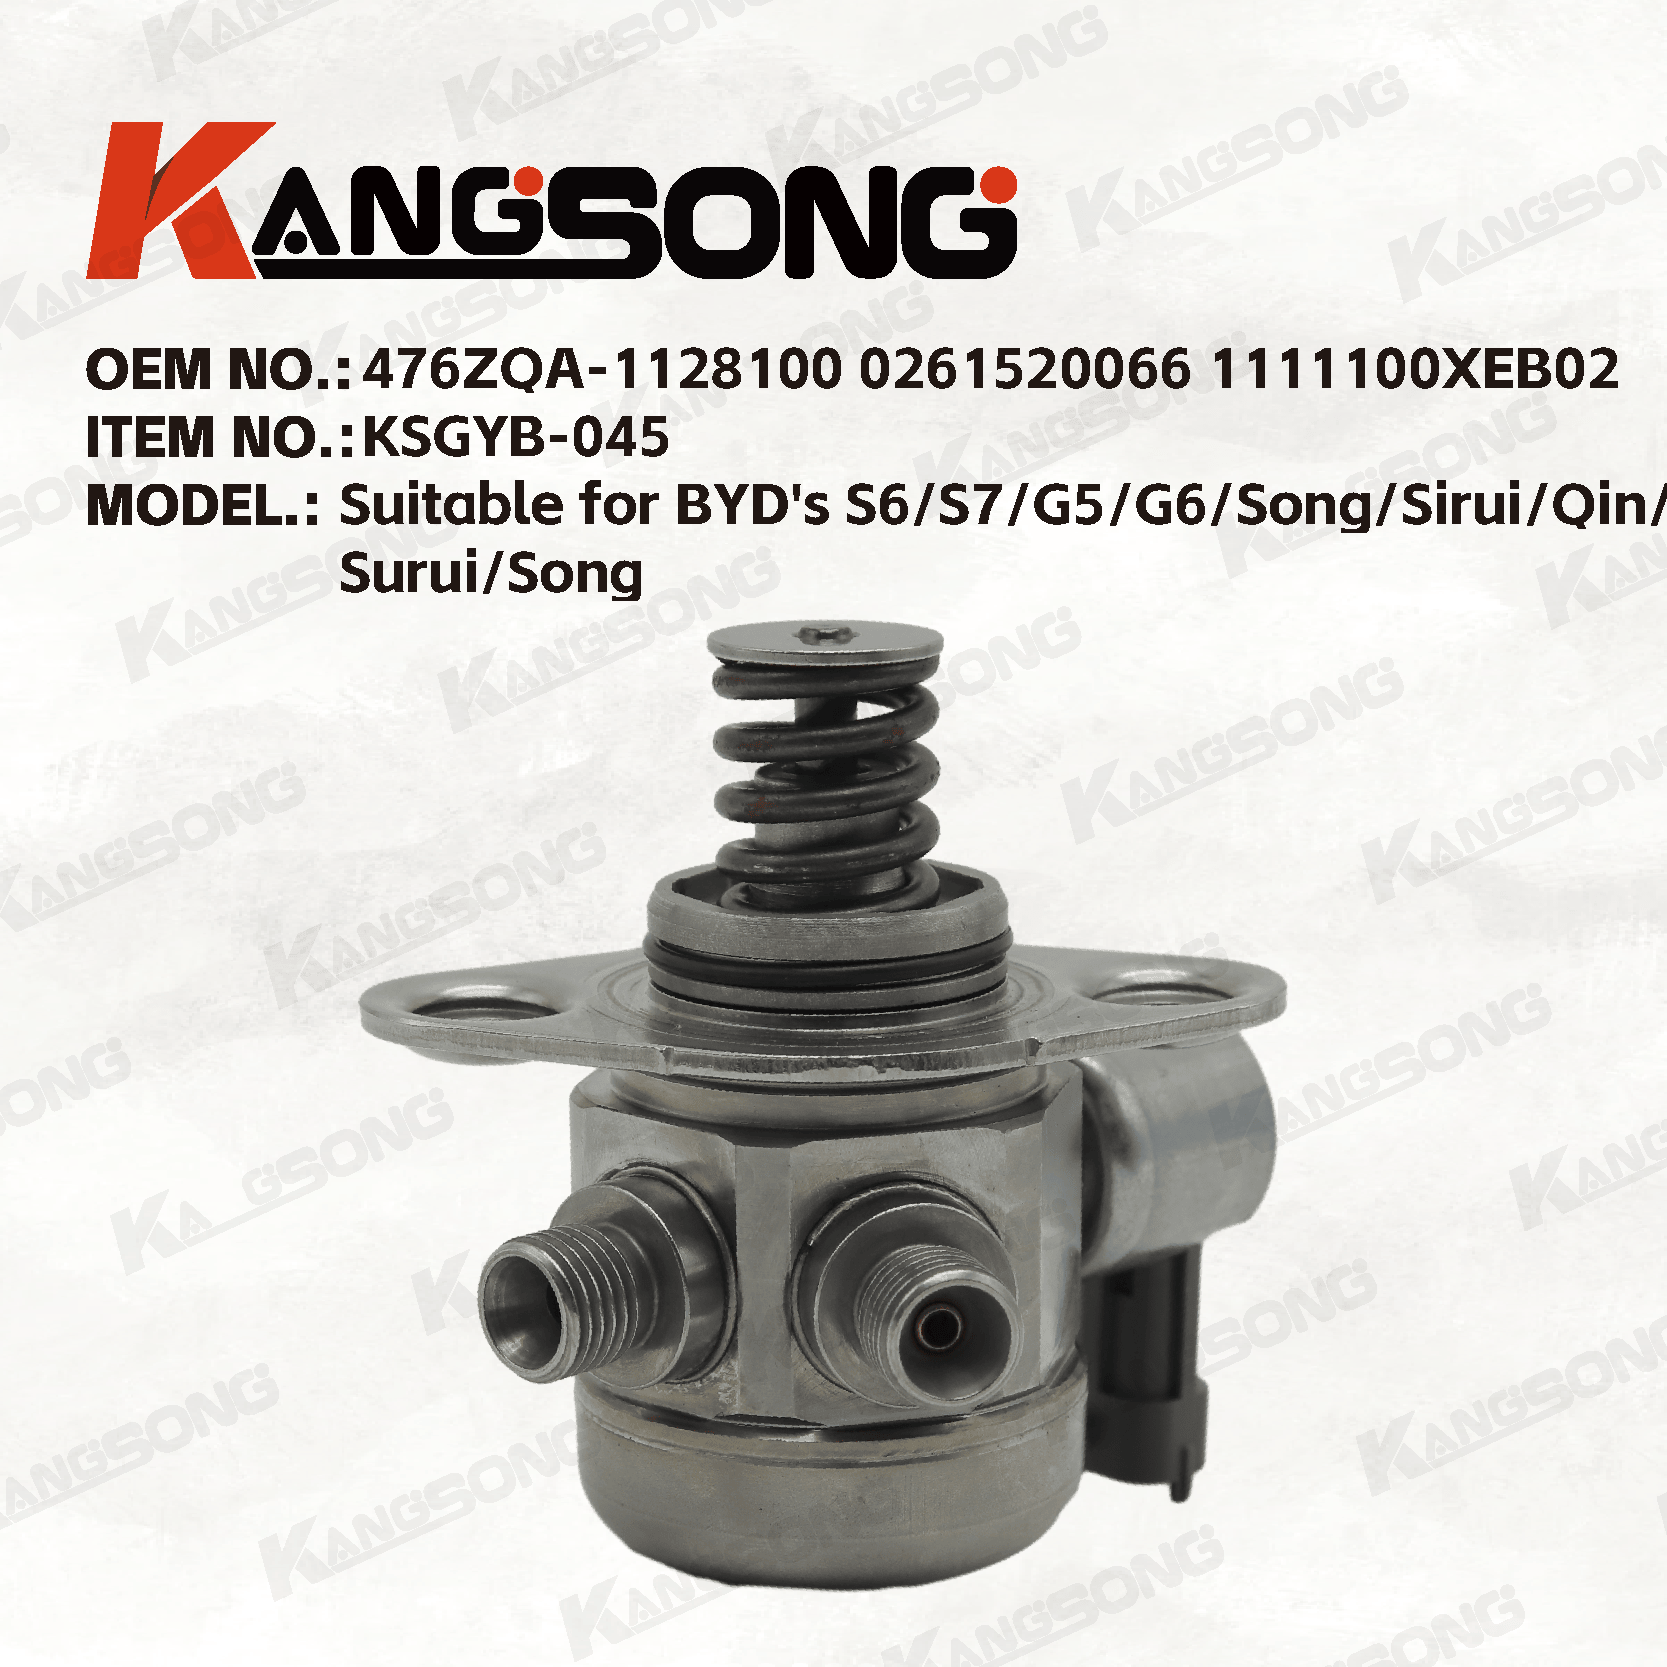 Applicable to  BYD/Geely/476ZQA-1128100 0261520066 1111100XEB02/High pressure fuel pump/KSGYB-045